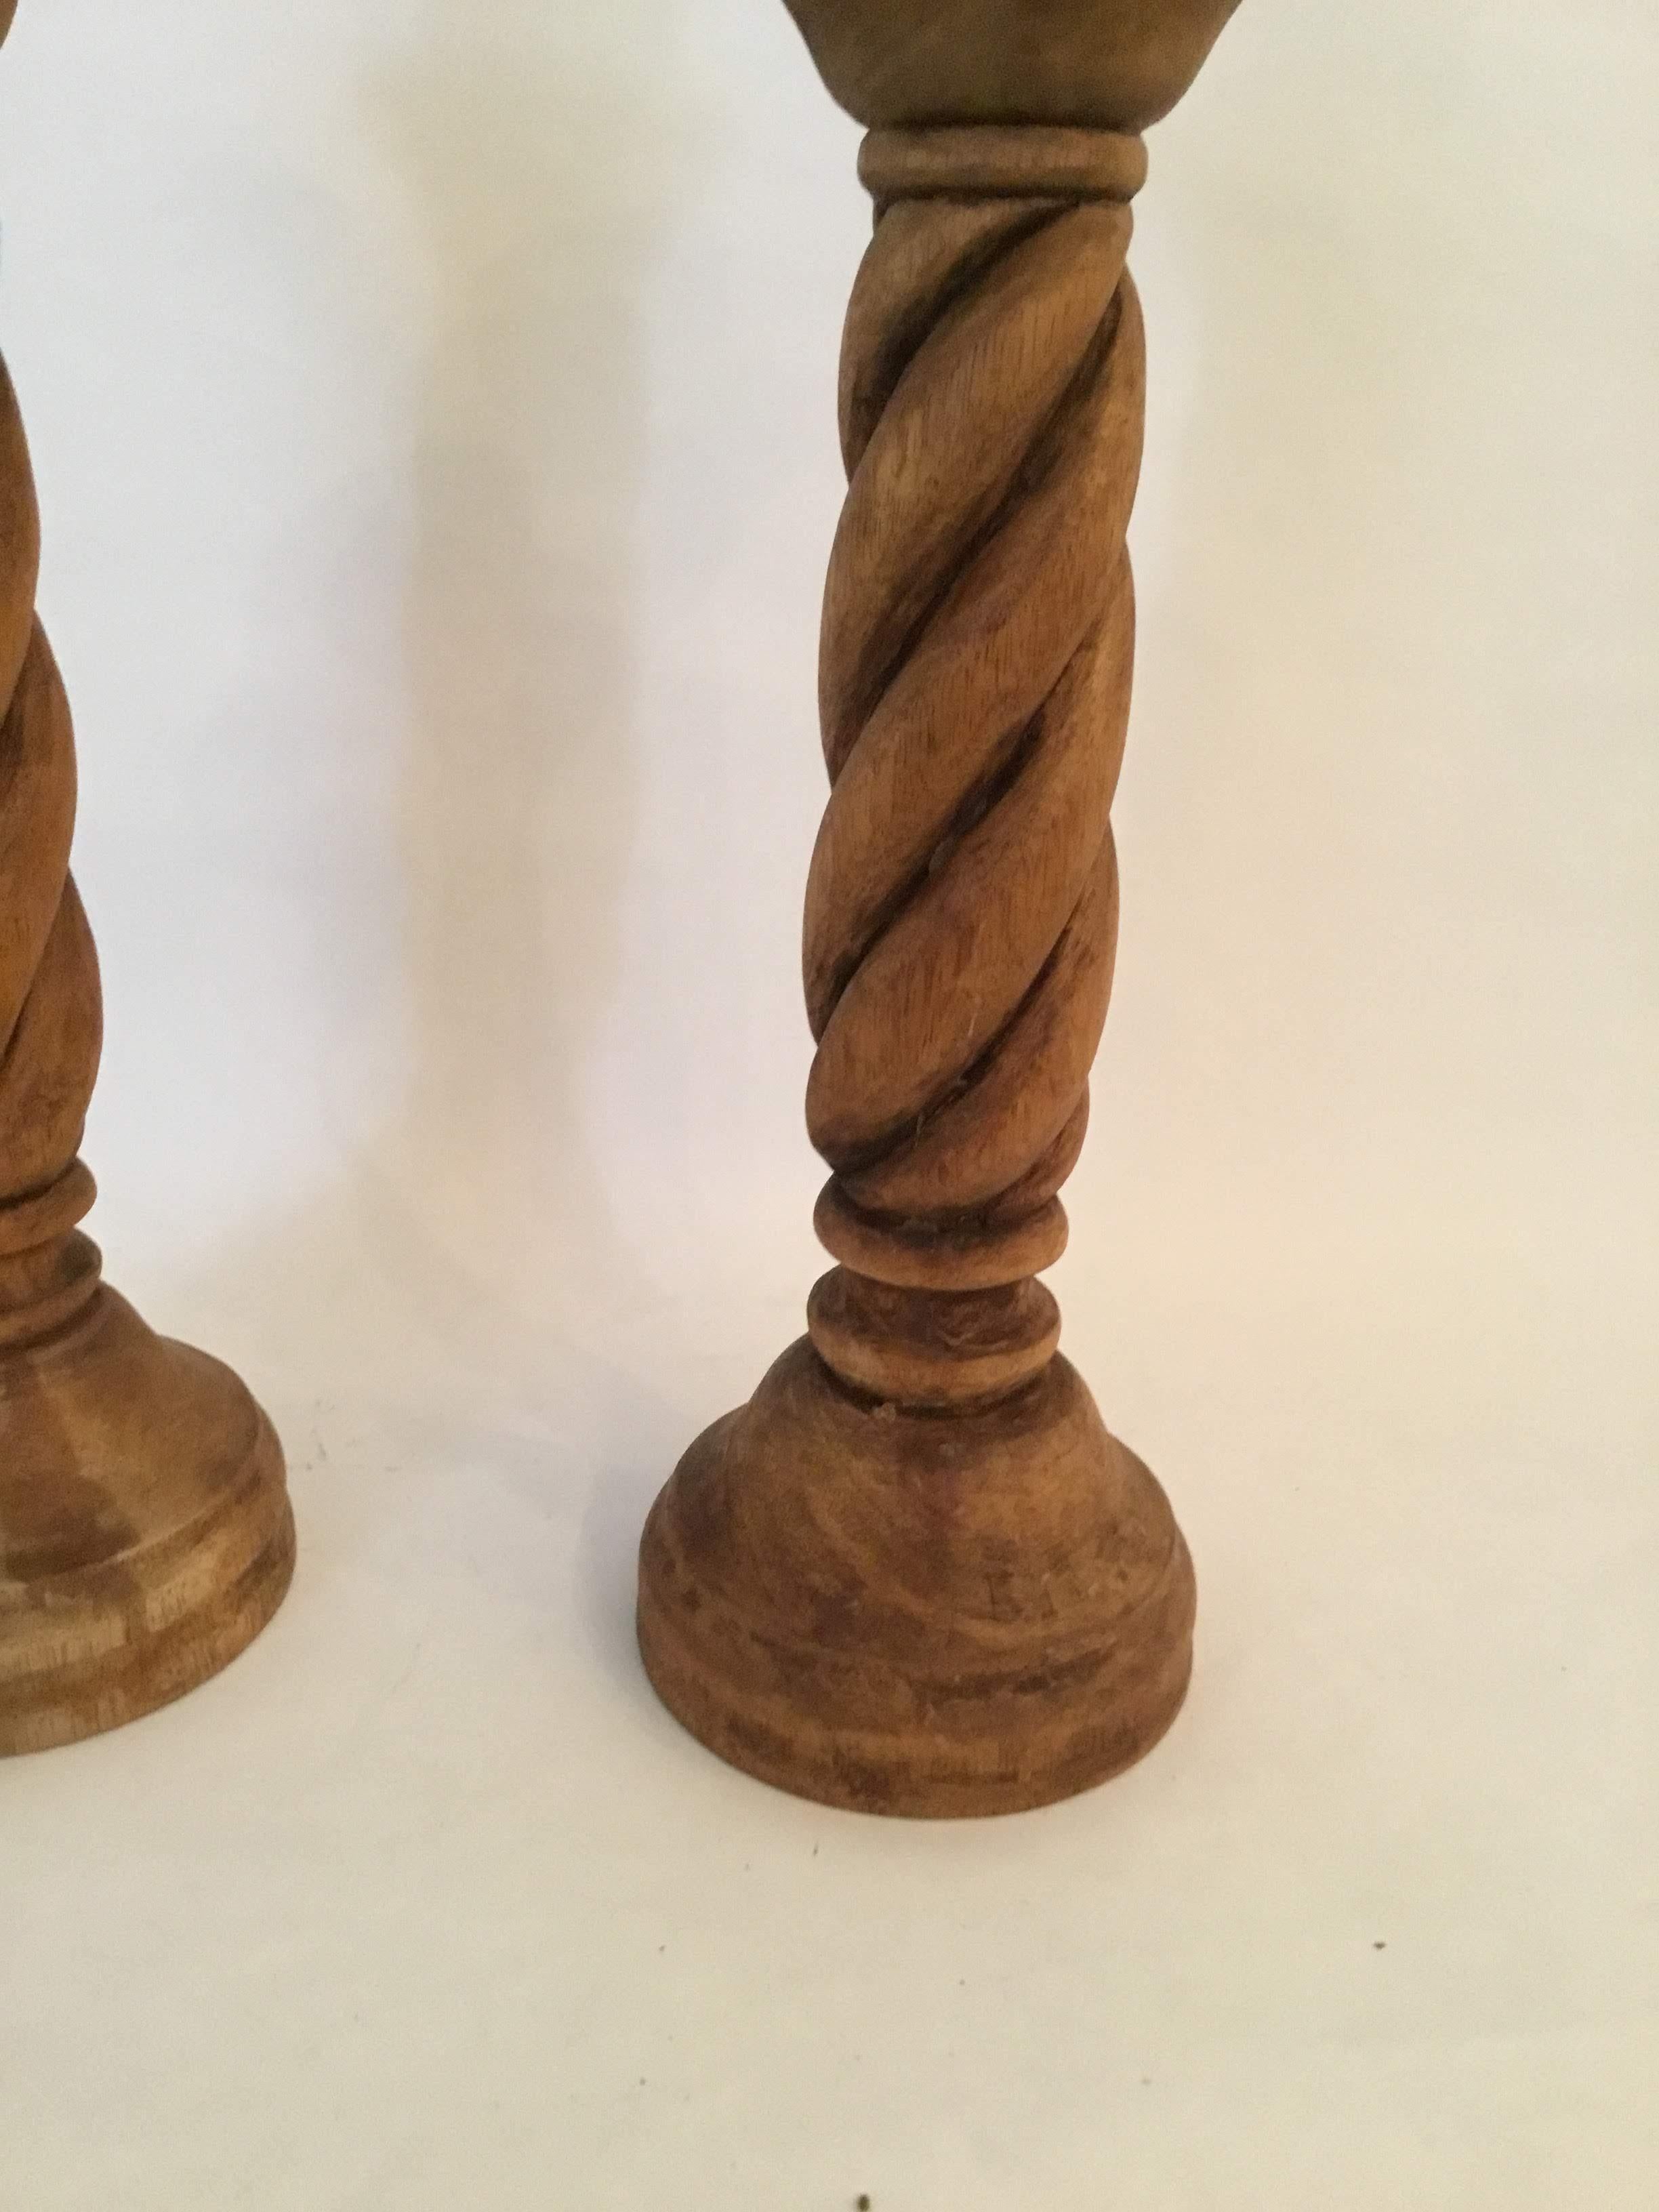 how to twist candlesticks